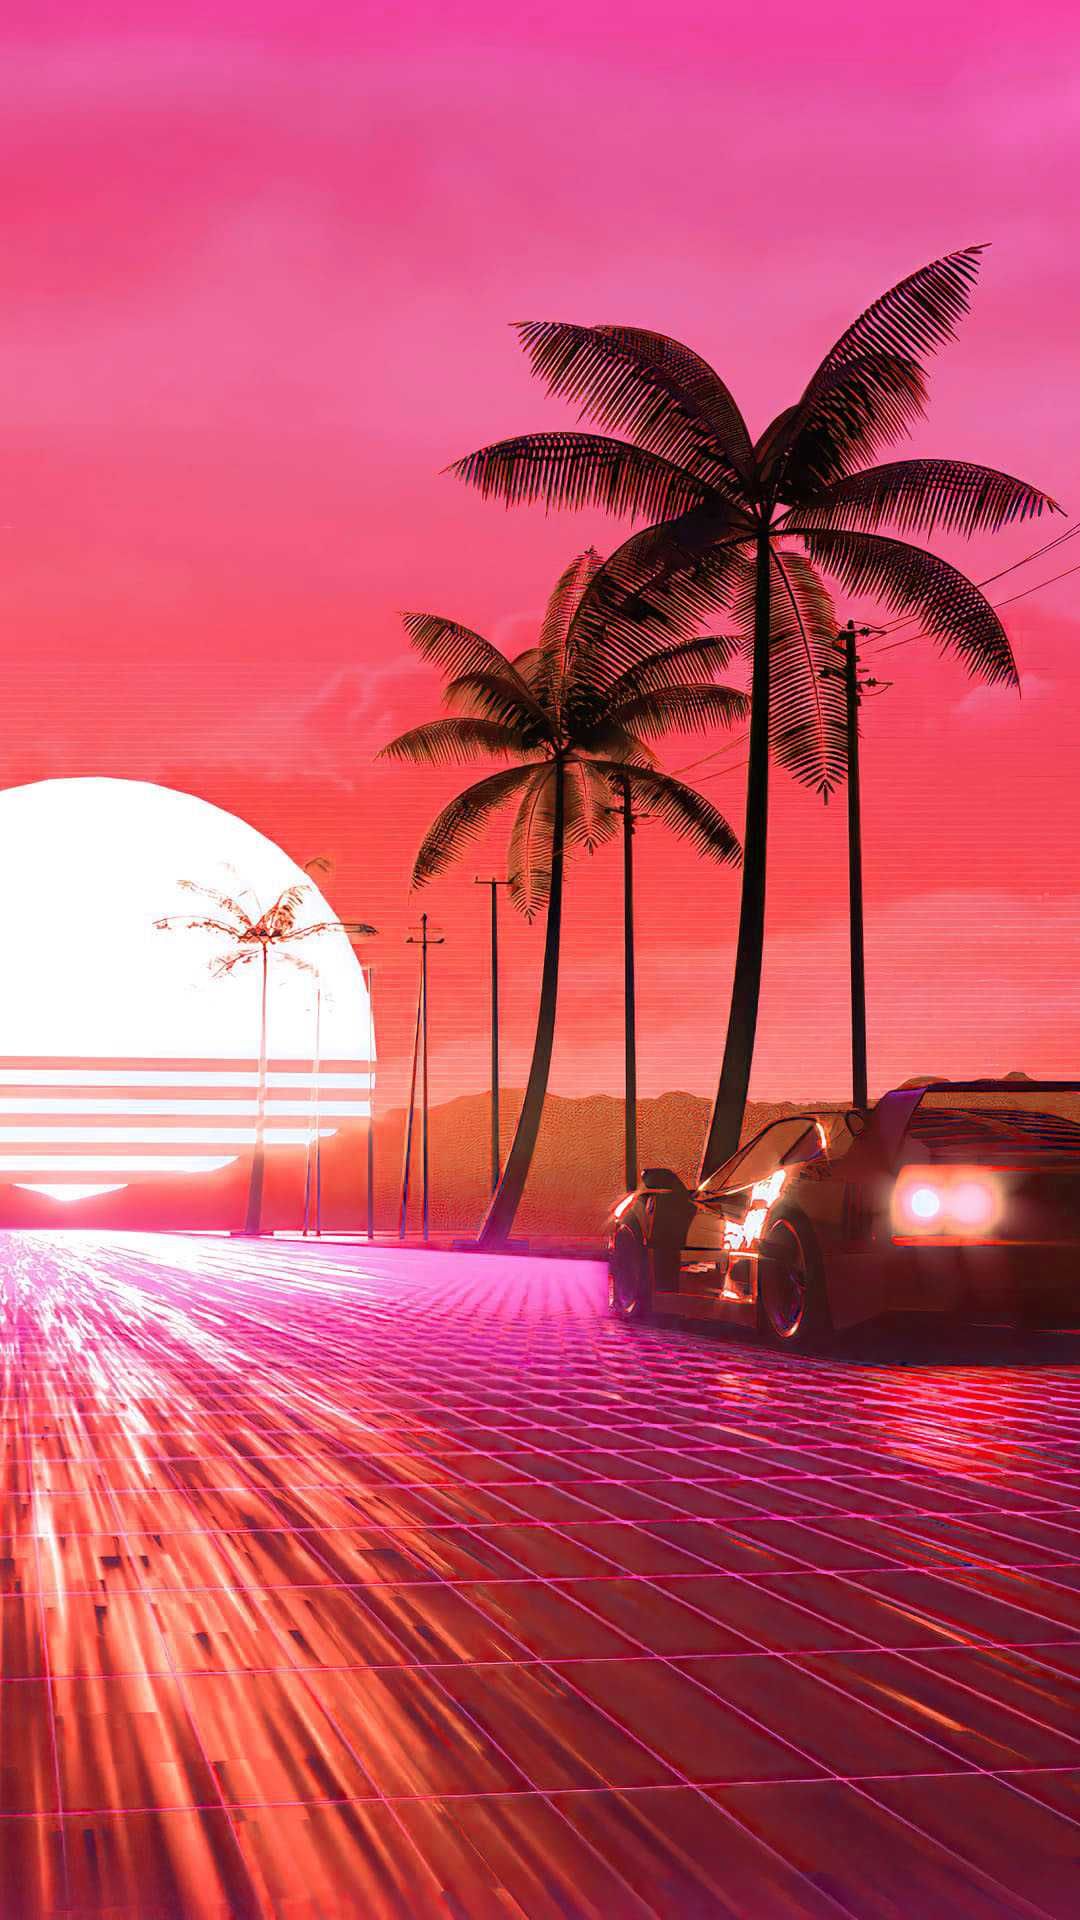 A retro futuristic car driving on the road with palm trees - Vaporwave